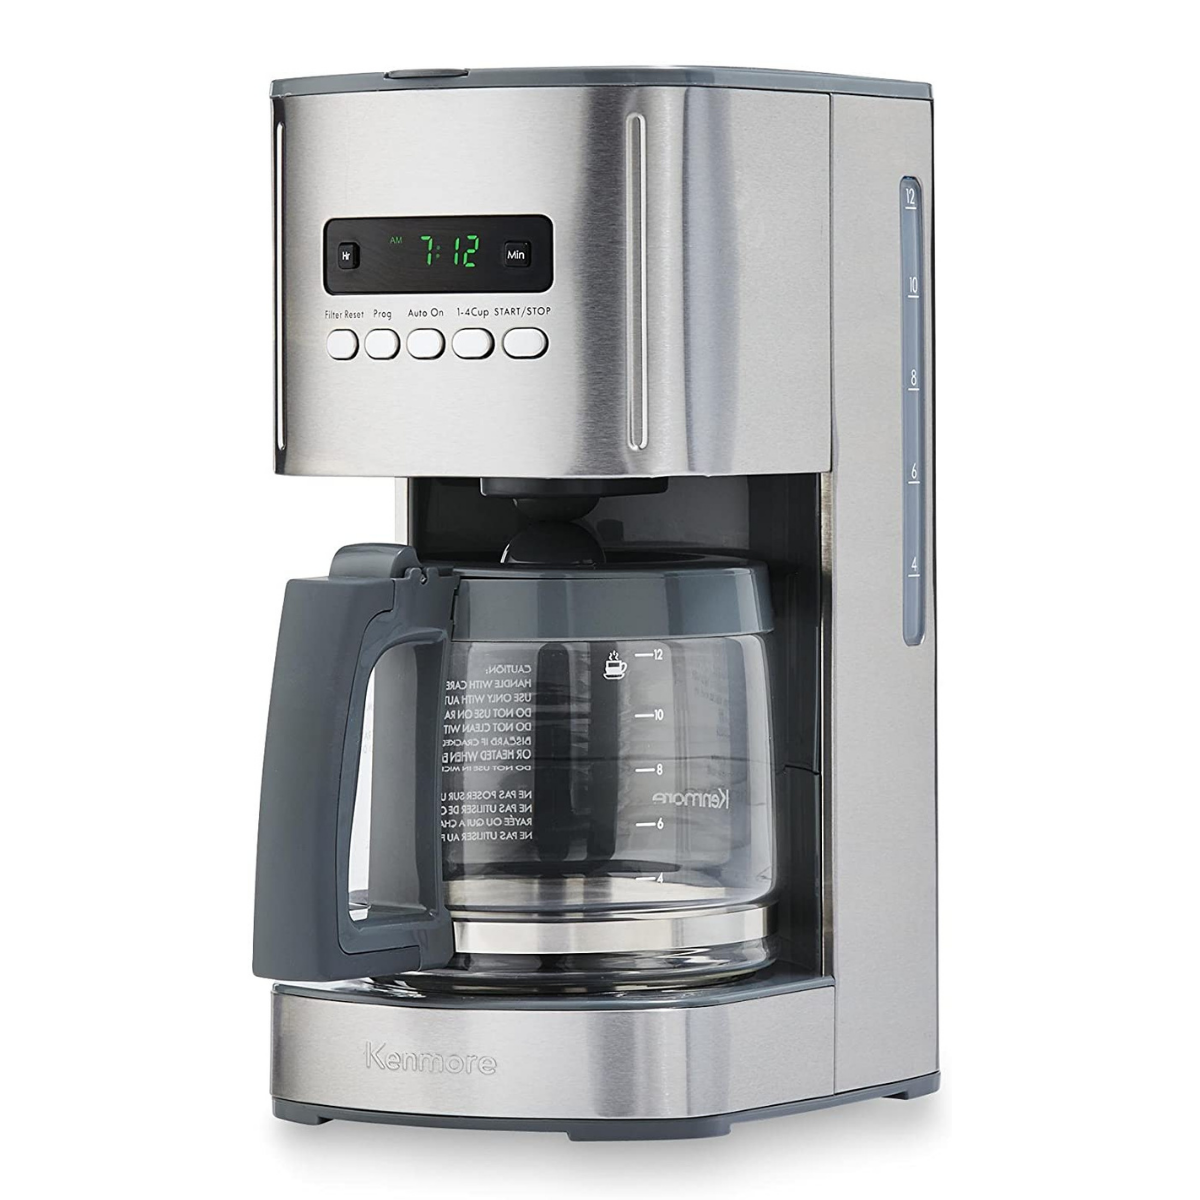 Kenmore 367101  12-Cup Programmable Aroma Control Coffee Maker